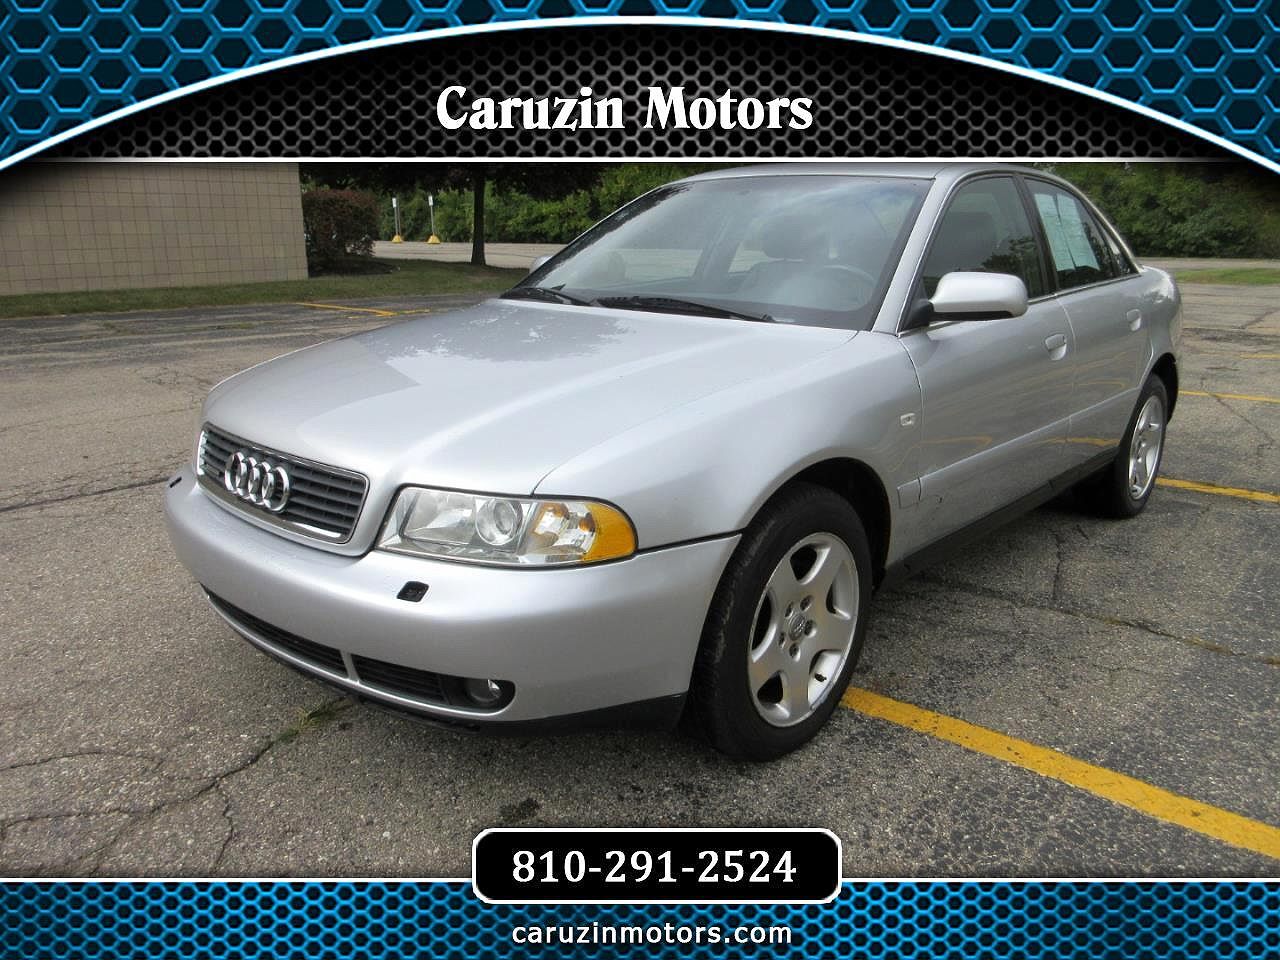 2000 Audi A4 null image 0